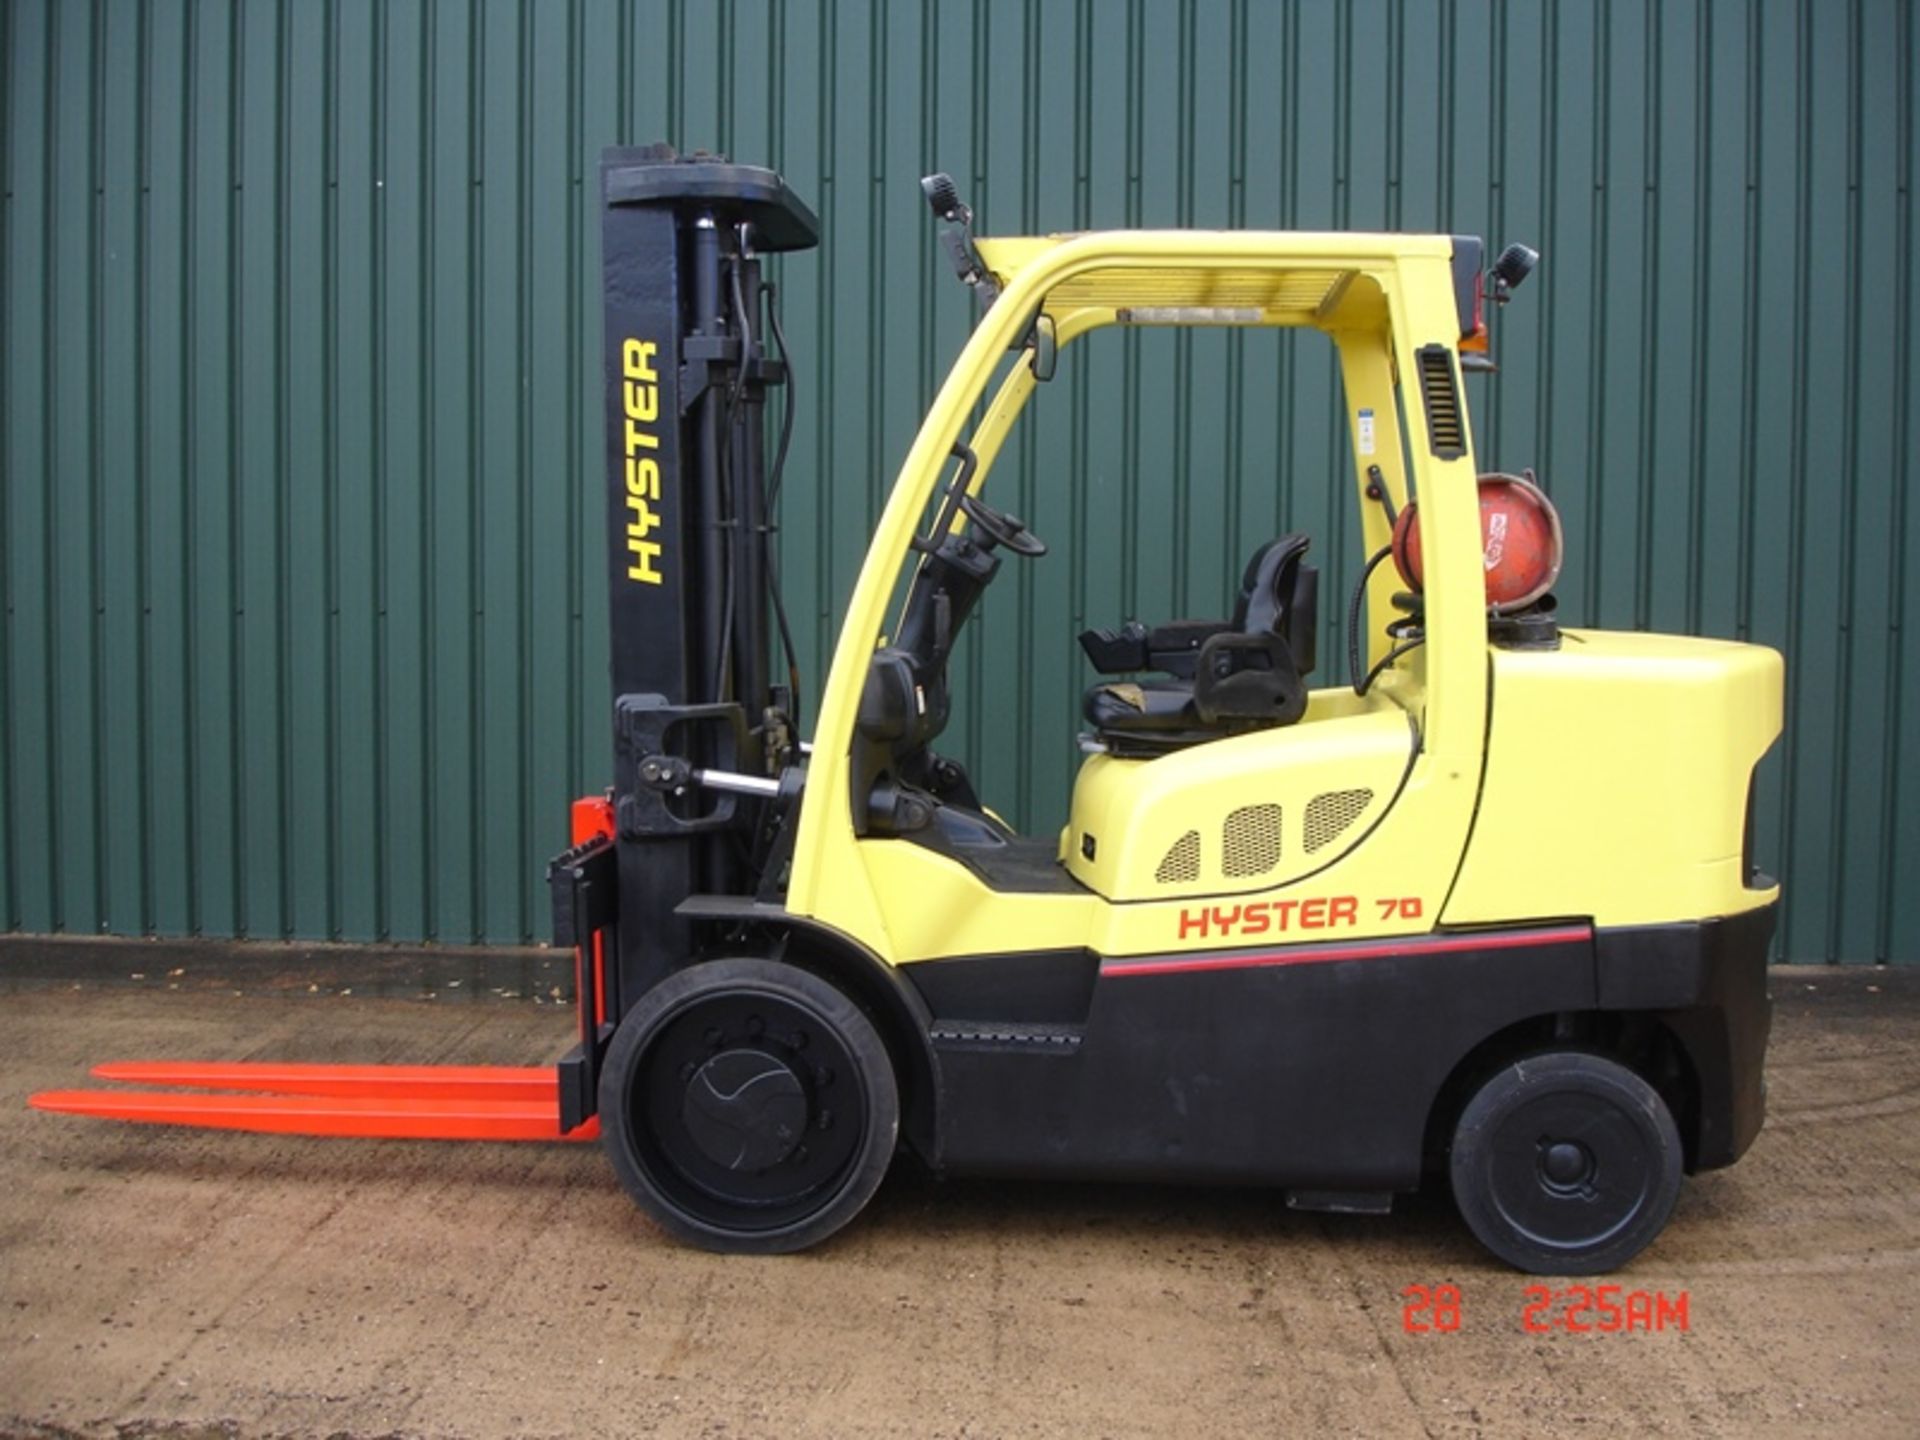 HYSTER COMPACT 7 TON FORKLIFT